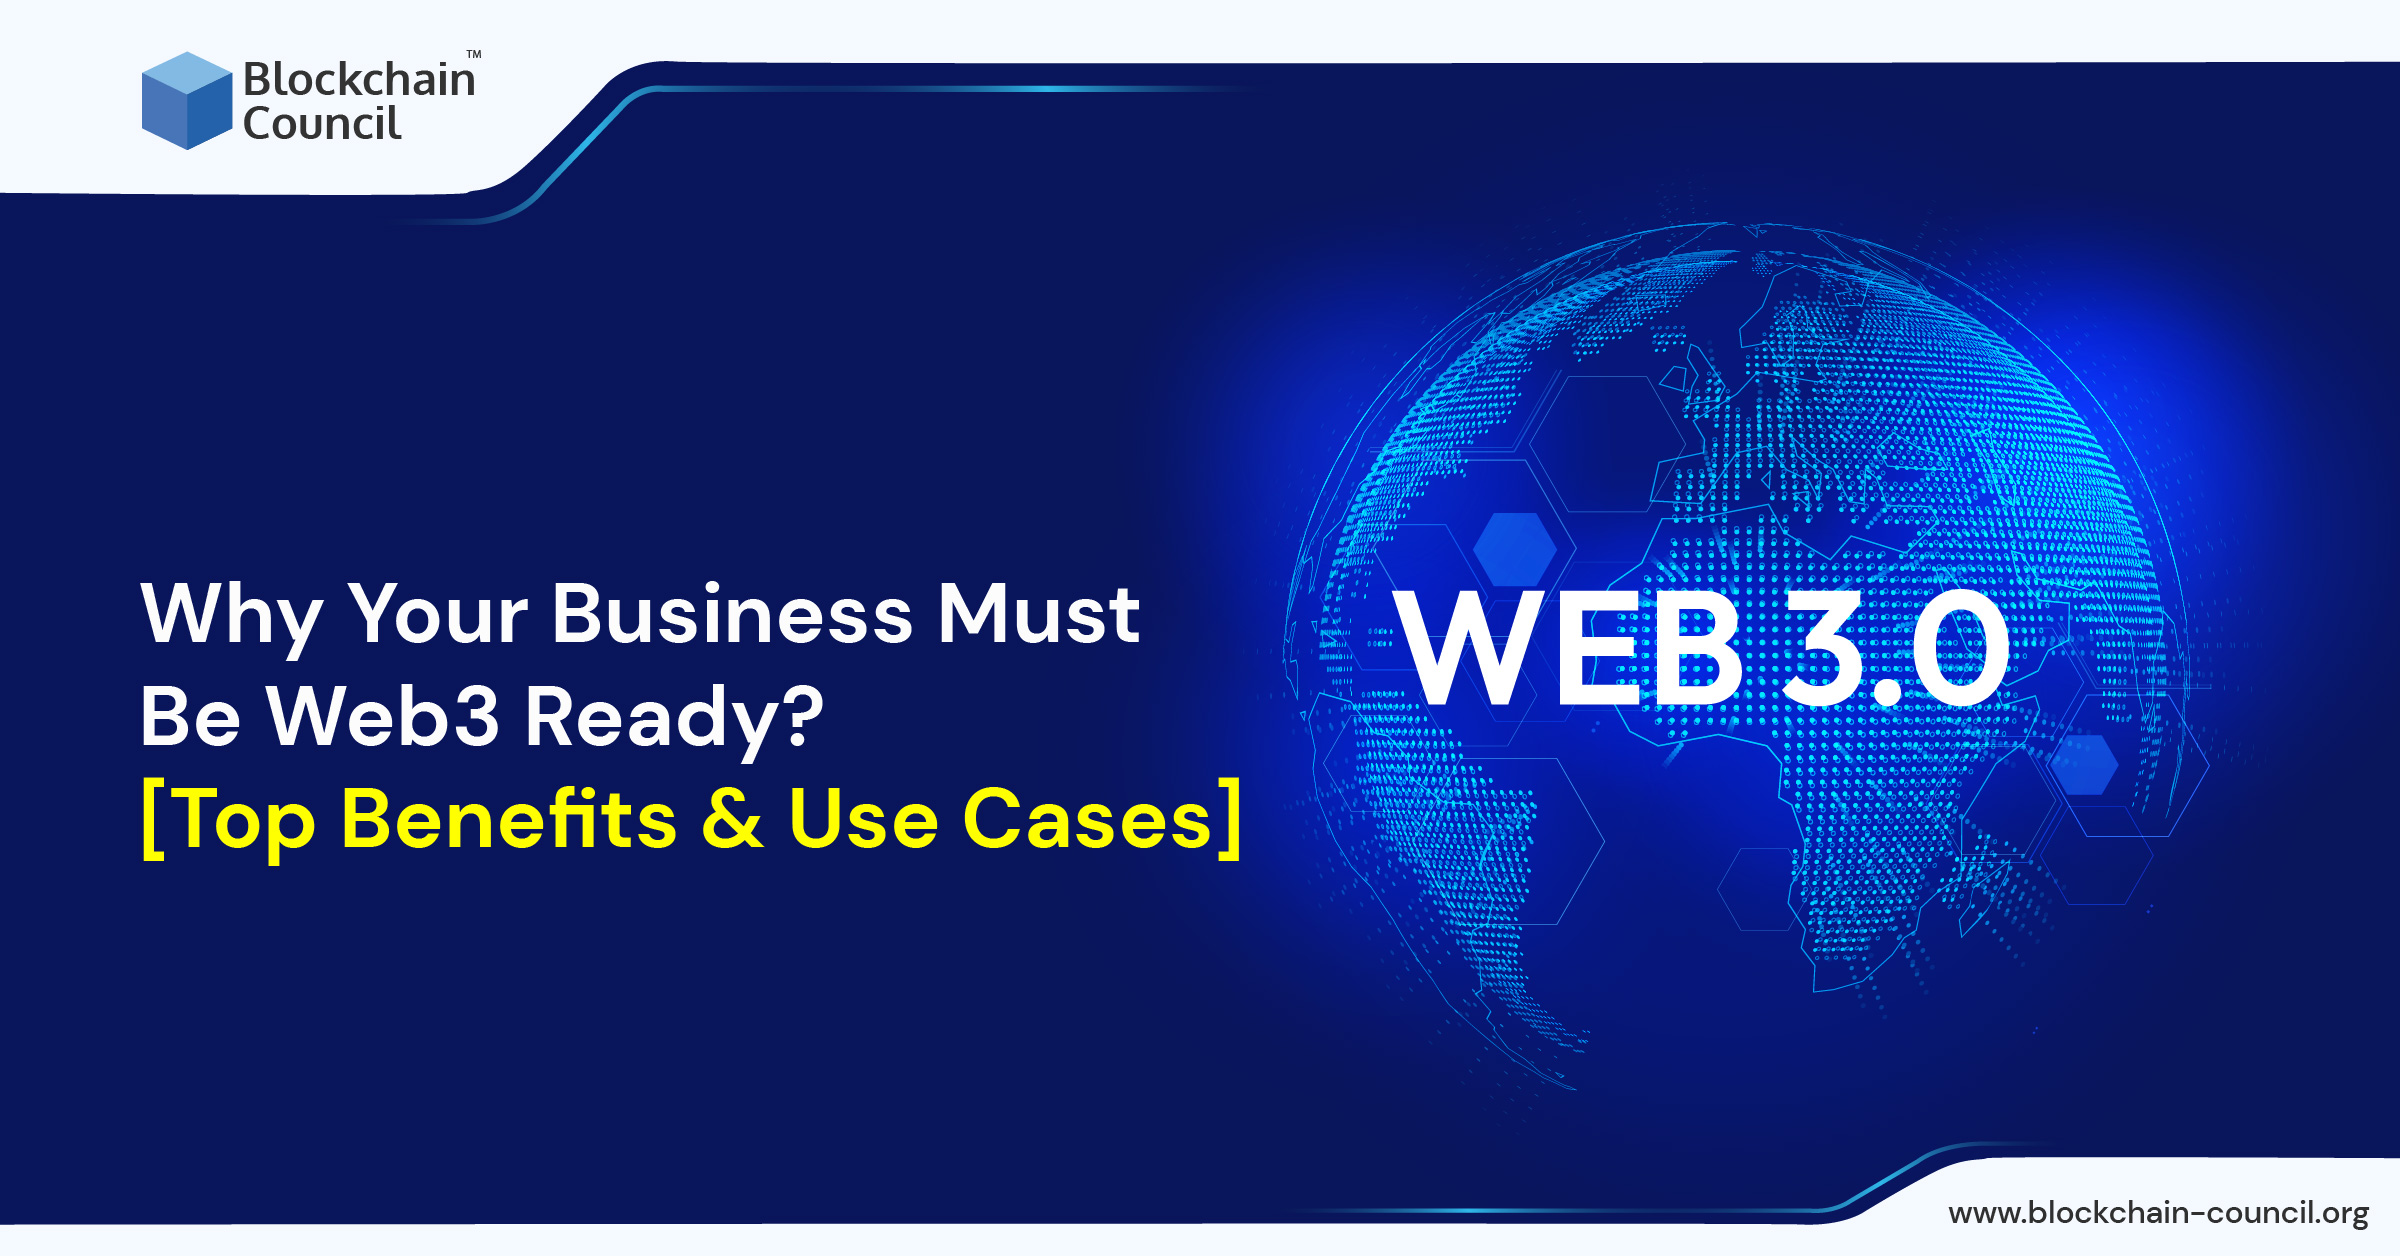 Why Your Business Must Be Web3 Ready [Top Benefits & Use Cases]